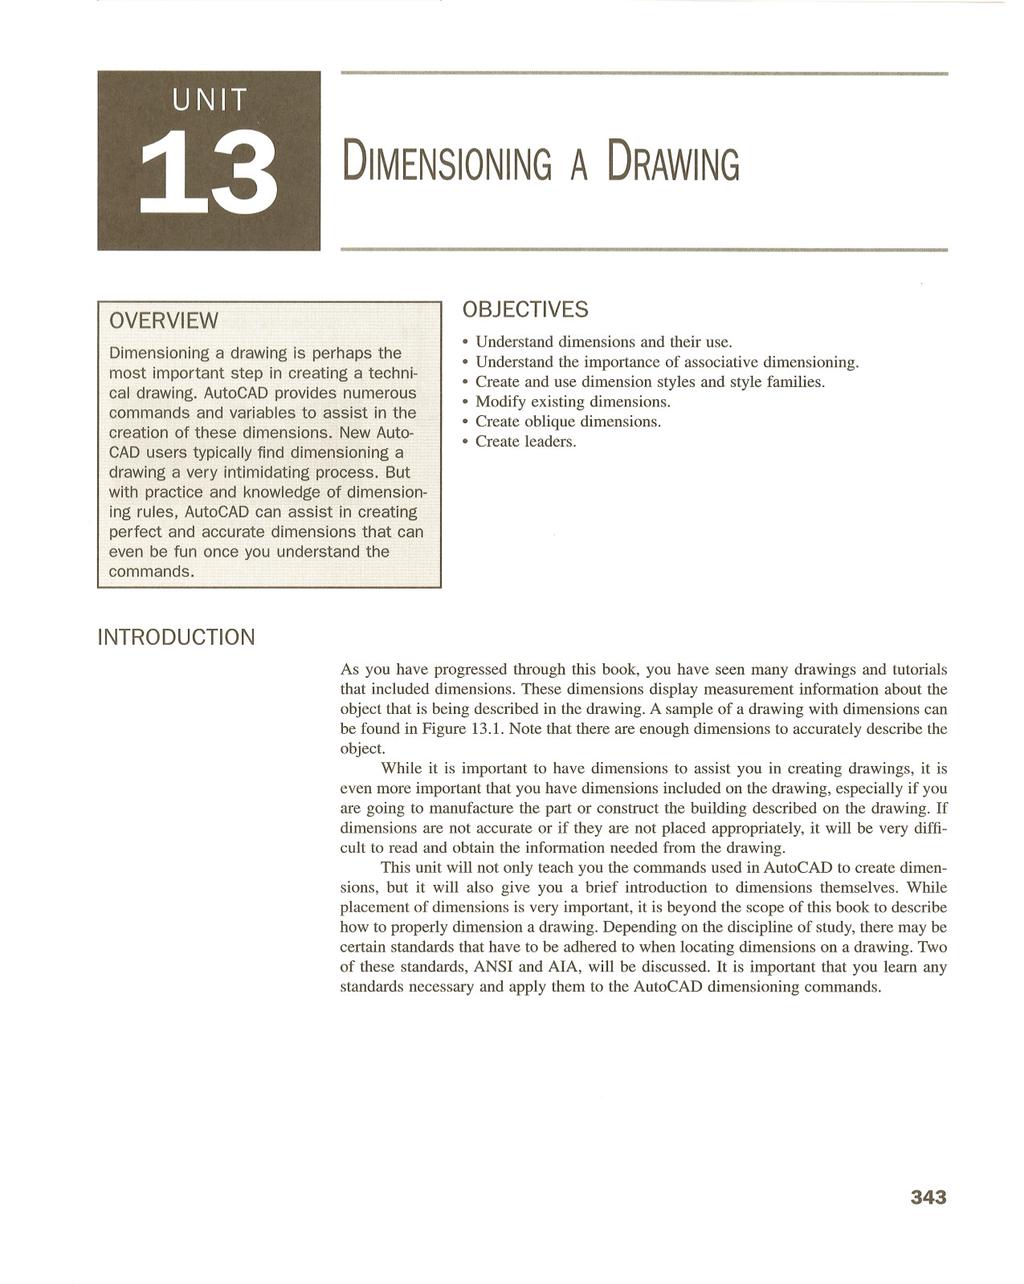 13 UNIT DIMENSIONING A DRAWING OVERVI EW Dimensioning a drawingisperhap$jhe most important step in creating a te9hnical drawing. AutoCAD provides.